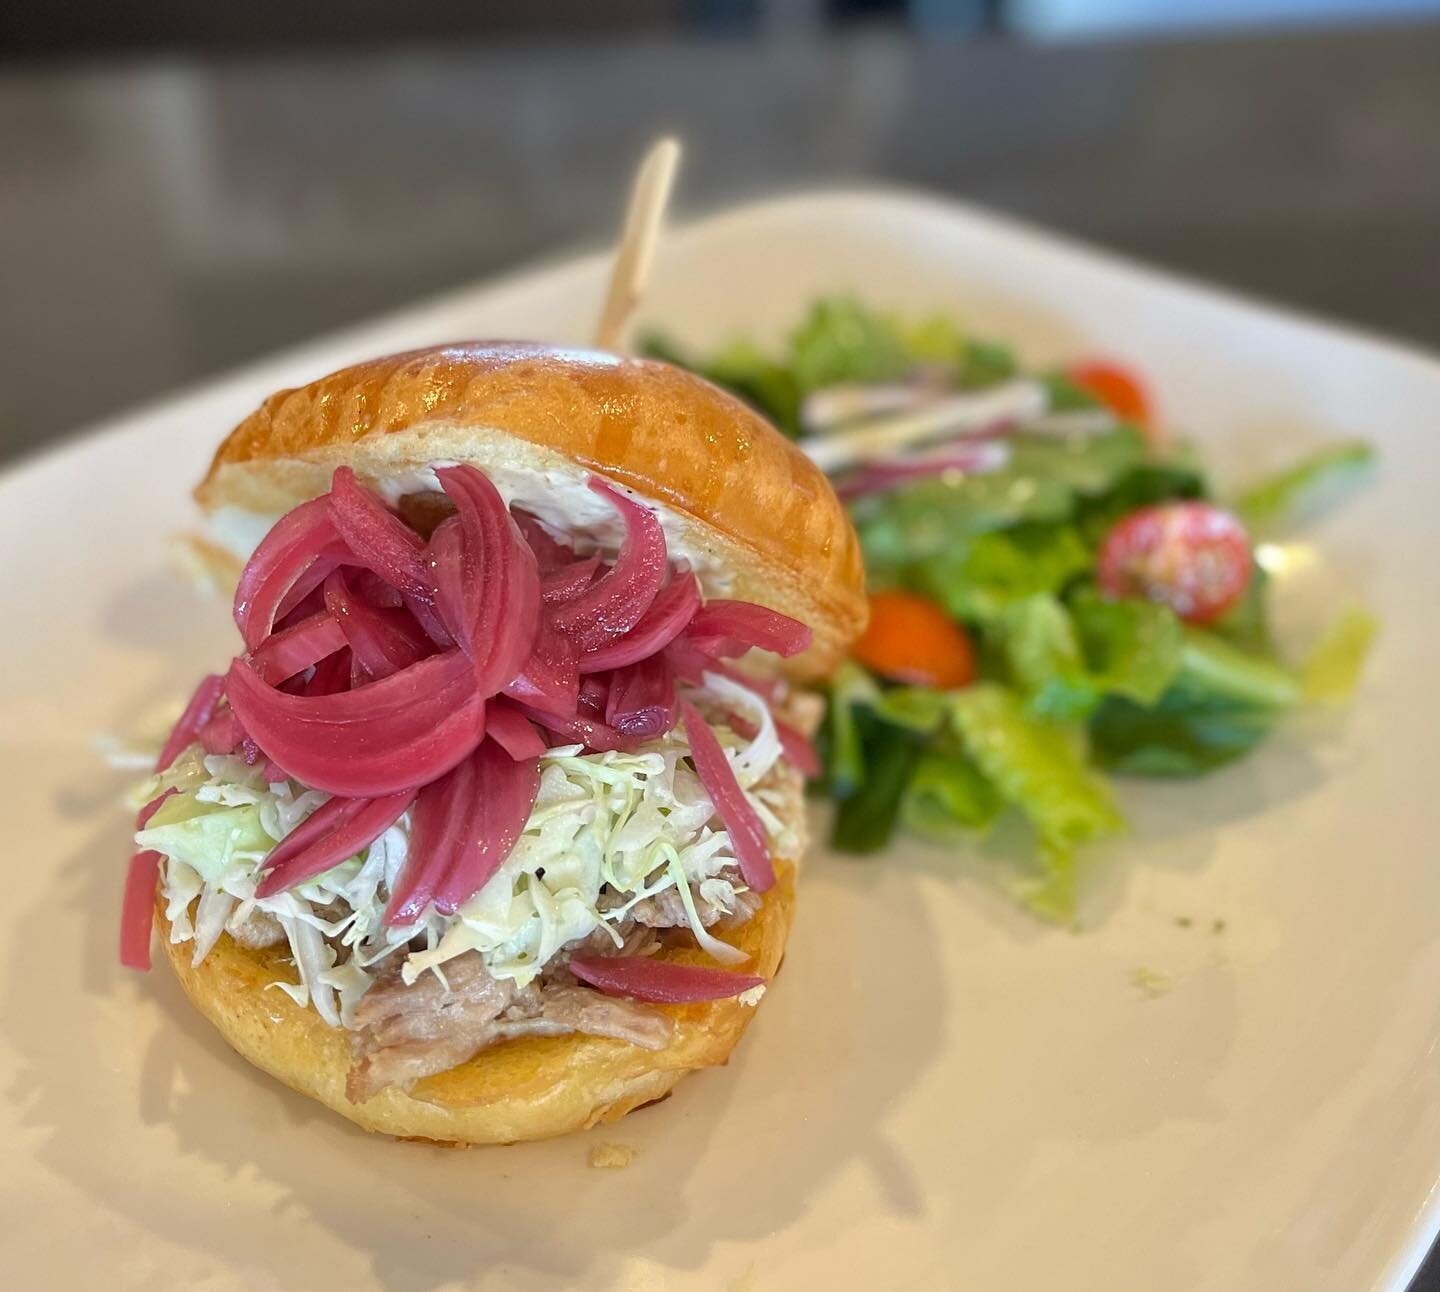 Come Join Us Tomorrow for Our Special
✨Pulled Pork Sandwich ✨
 // Pulled Pork topped with Cilantro Coleslaw, Pickled Red Onions and Jalape&ntilde;o Mayo on a Brioche Bun. Served with a side. \\ 
We will be closed on Monday. Have a fun holiday! 😁 
#p